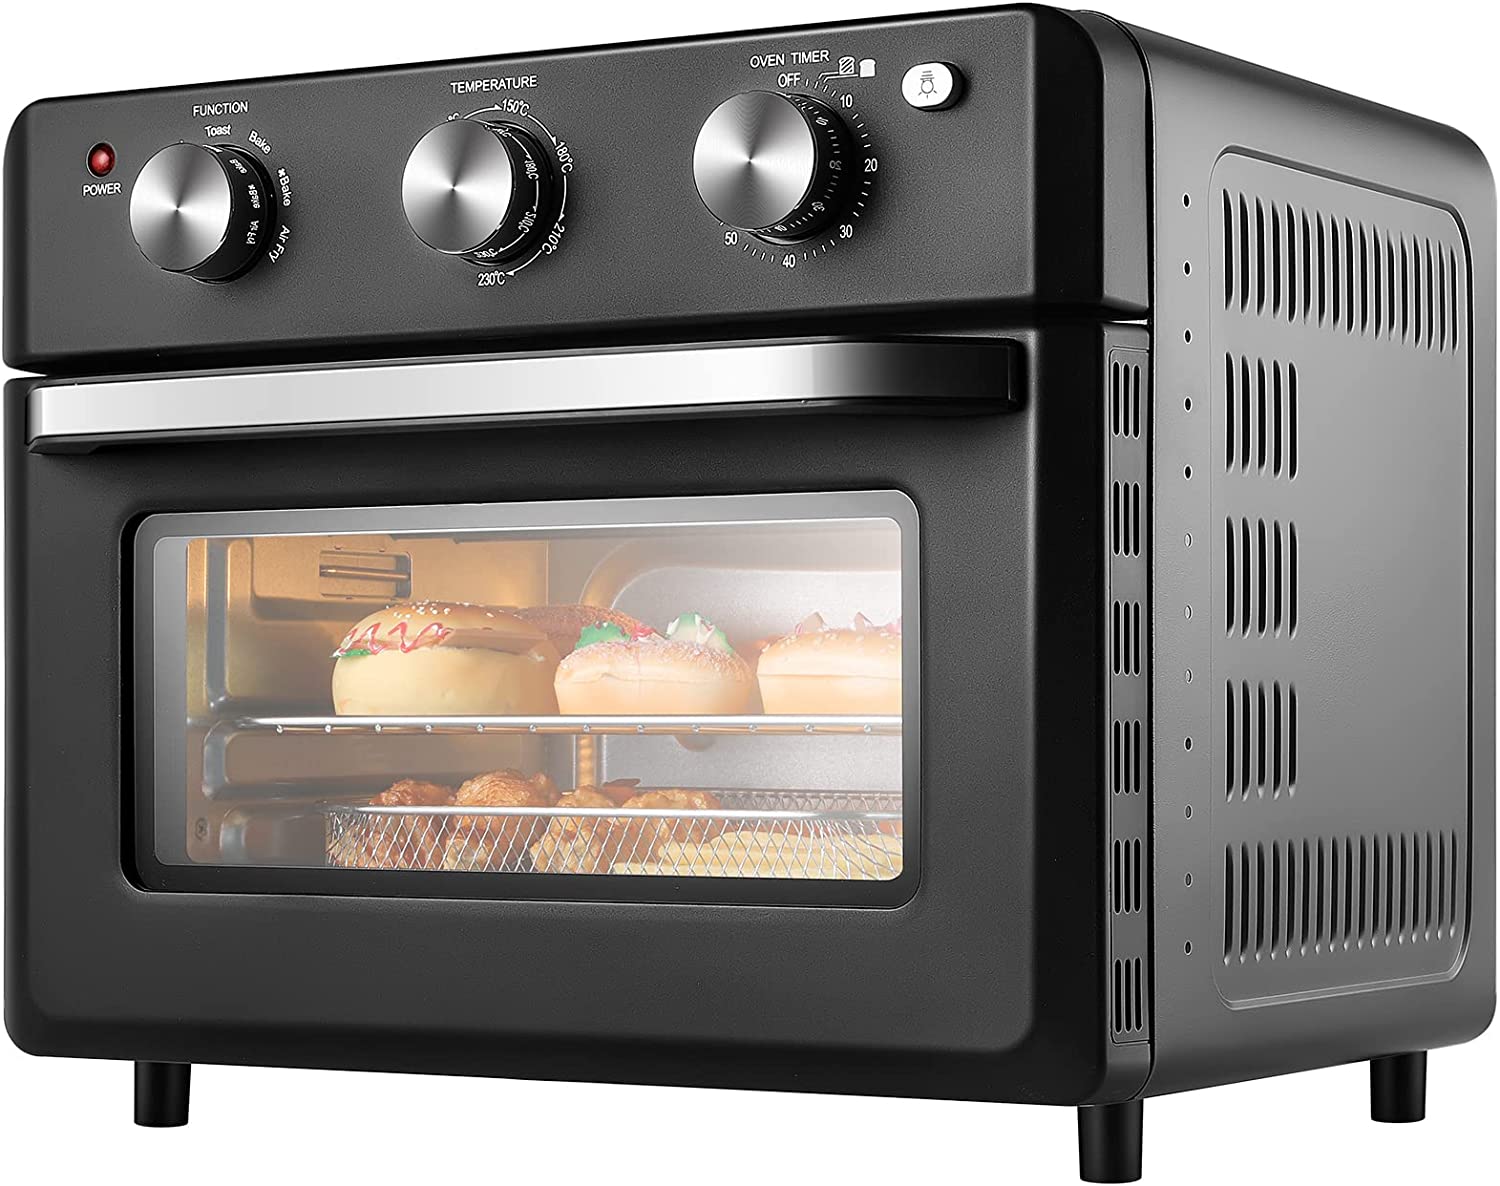 Mini Oven 20 L, Mini Pizza Oven, Hot Air Fryer, Airfryer, Mini Oven, 1550 W Hot Air Oven with 4 Accessories, with 360° Hot Air Circulation & Timer, Camping Oven, Toaster Grill, Oven with Circulation